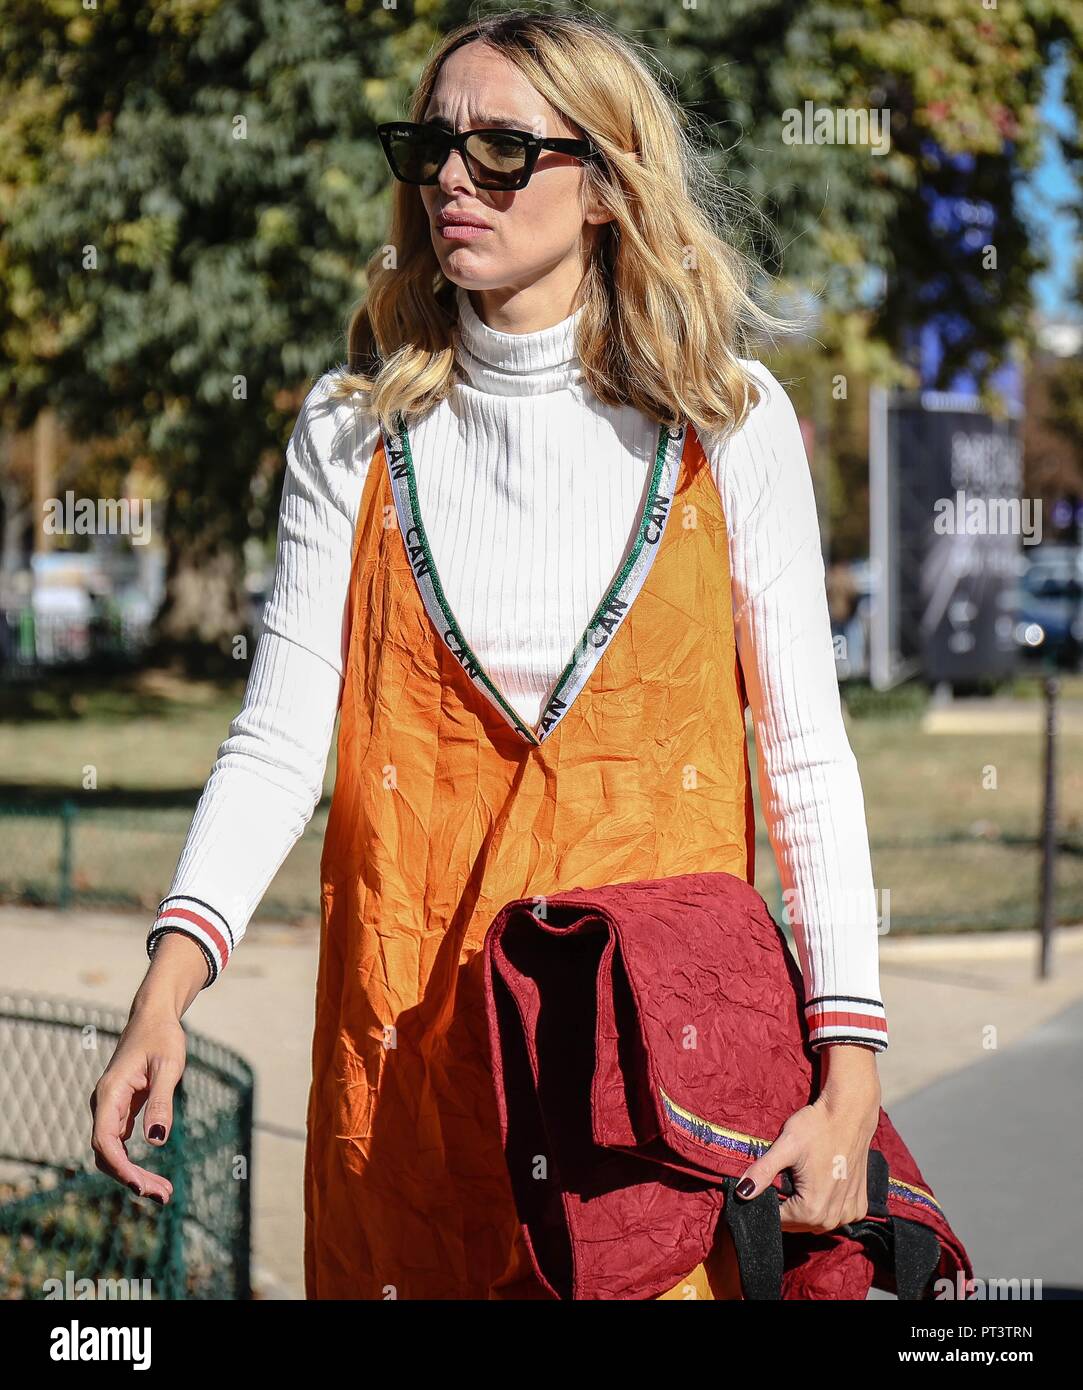 PARIS, France- September 26 2018:Candela Pelizza on the street duing the Paris Fashion Week. Stock Photo